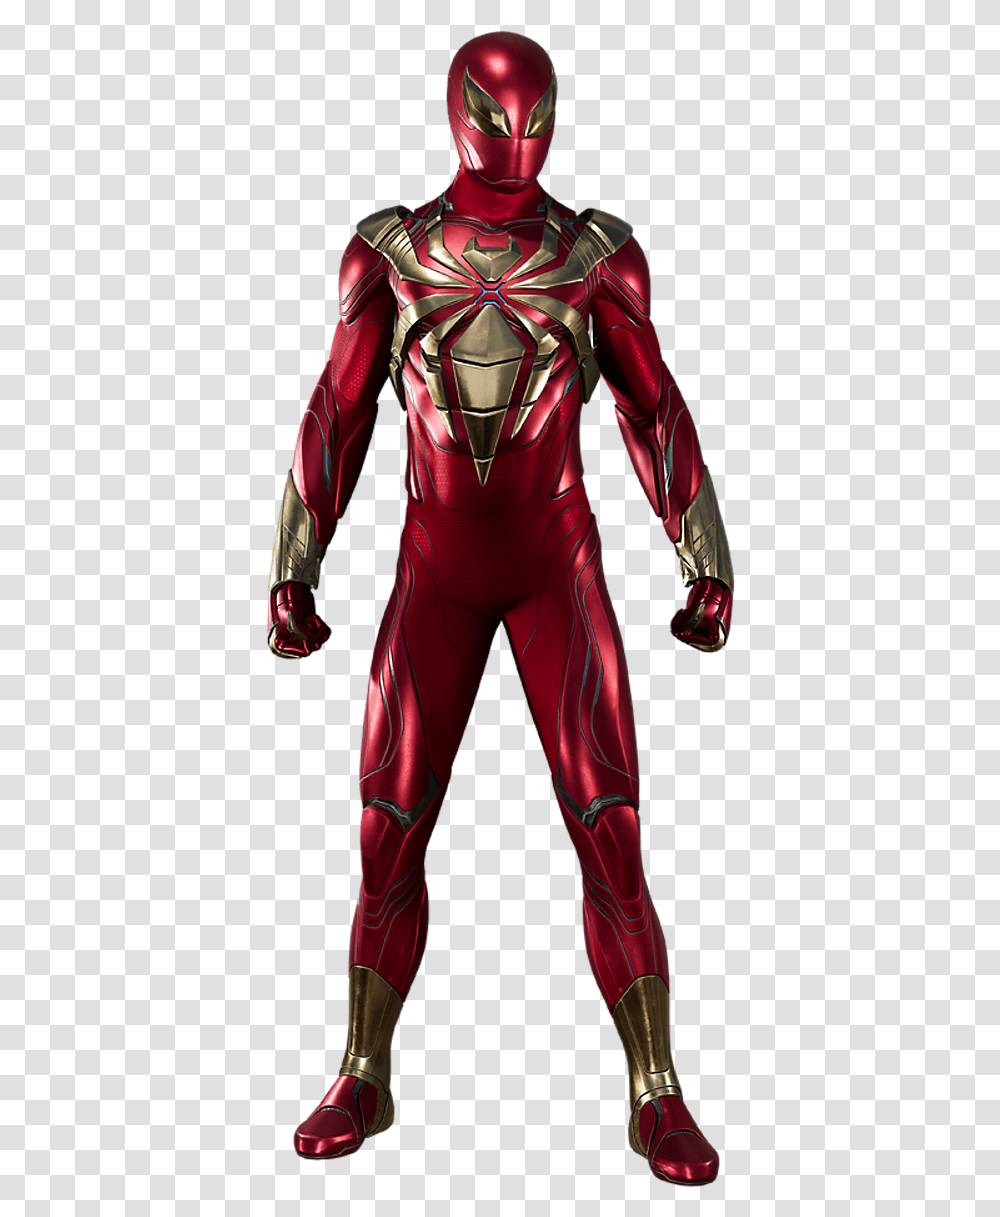 S Spider Man Wiki Spider Man Ps4 Iron Spider Suit Dlc, Person, Human, Spandex, Costume Transparent Png